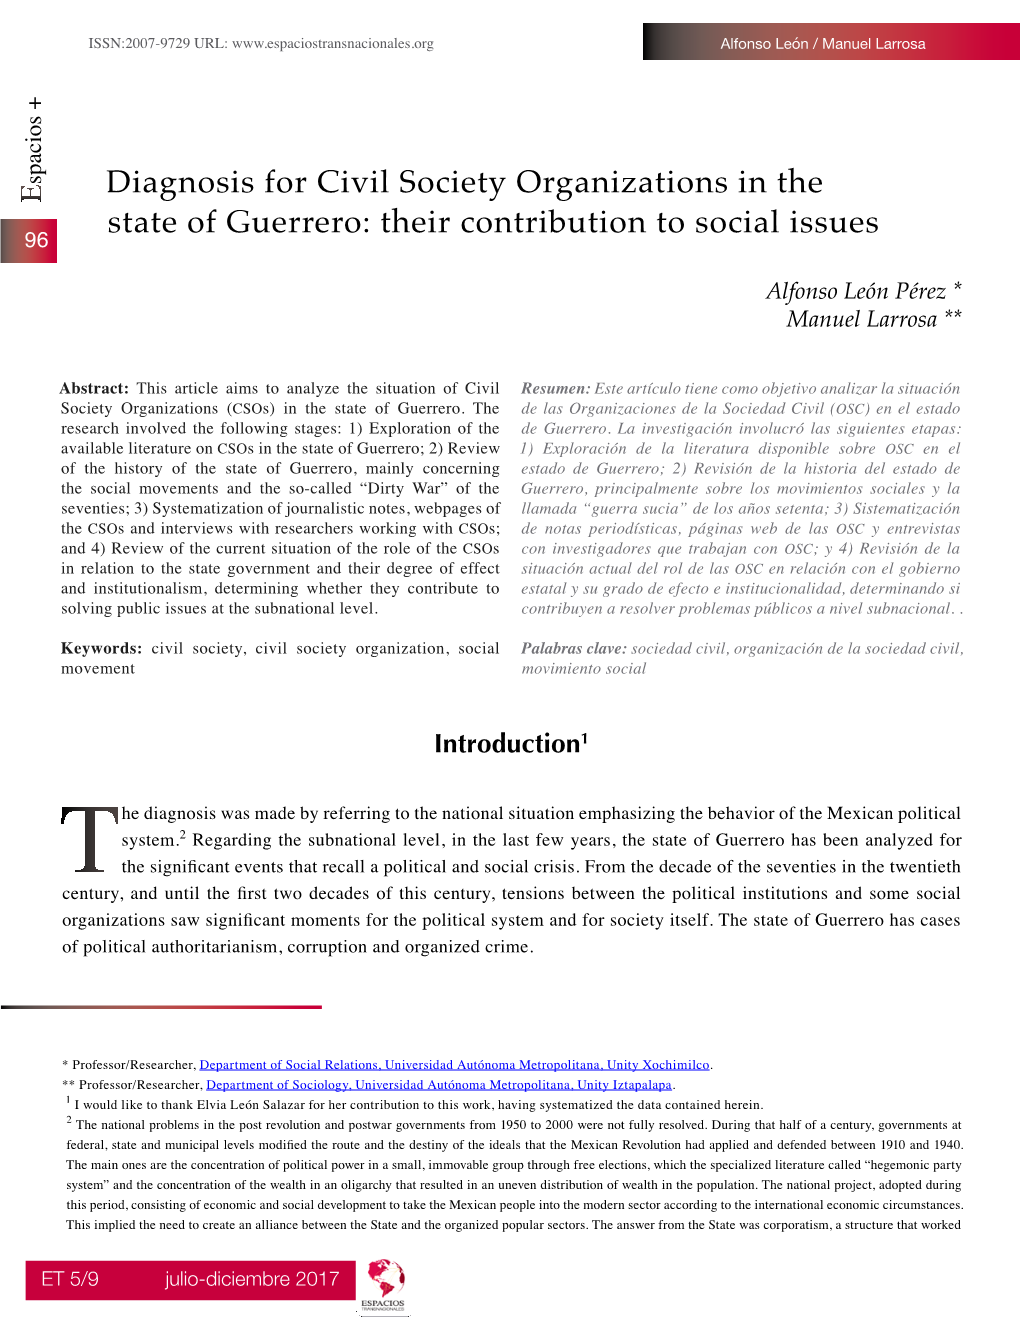 Diagnosis for Civil Society Organizations in the State of Guerrero